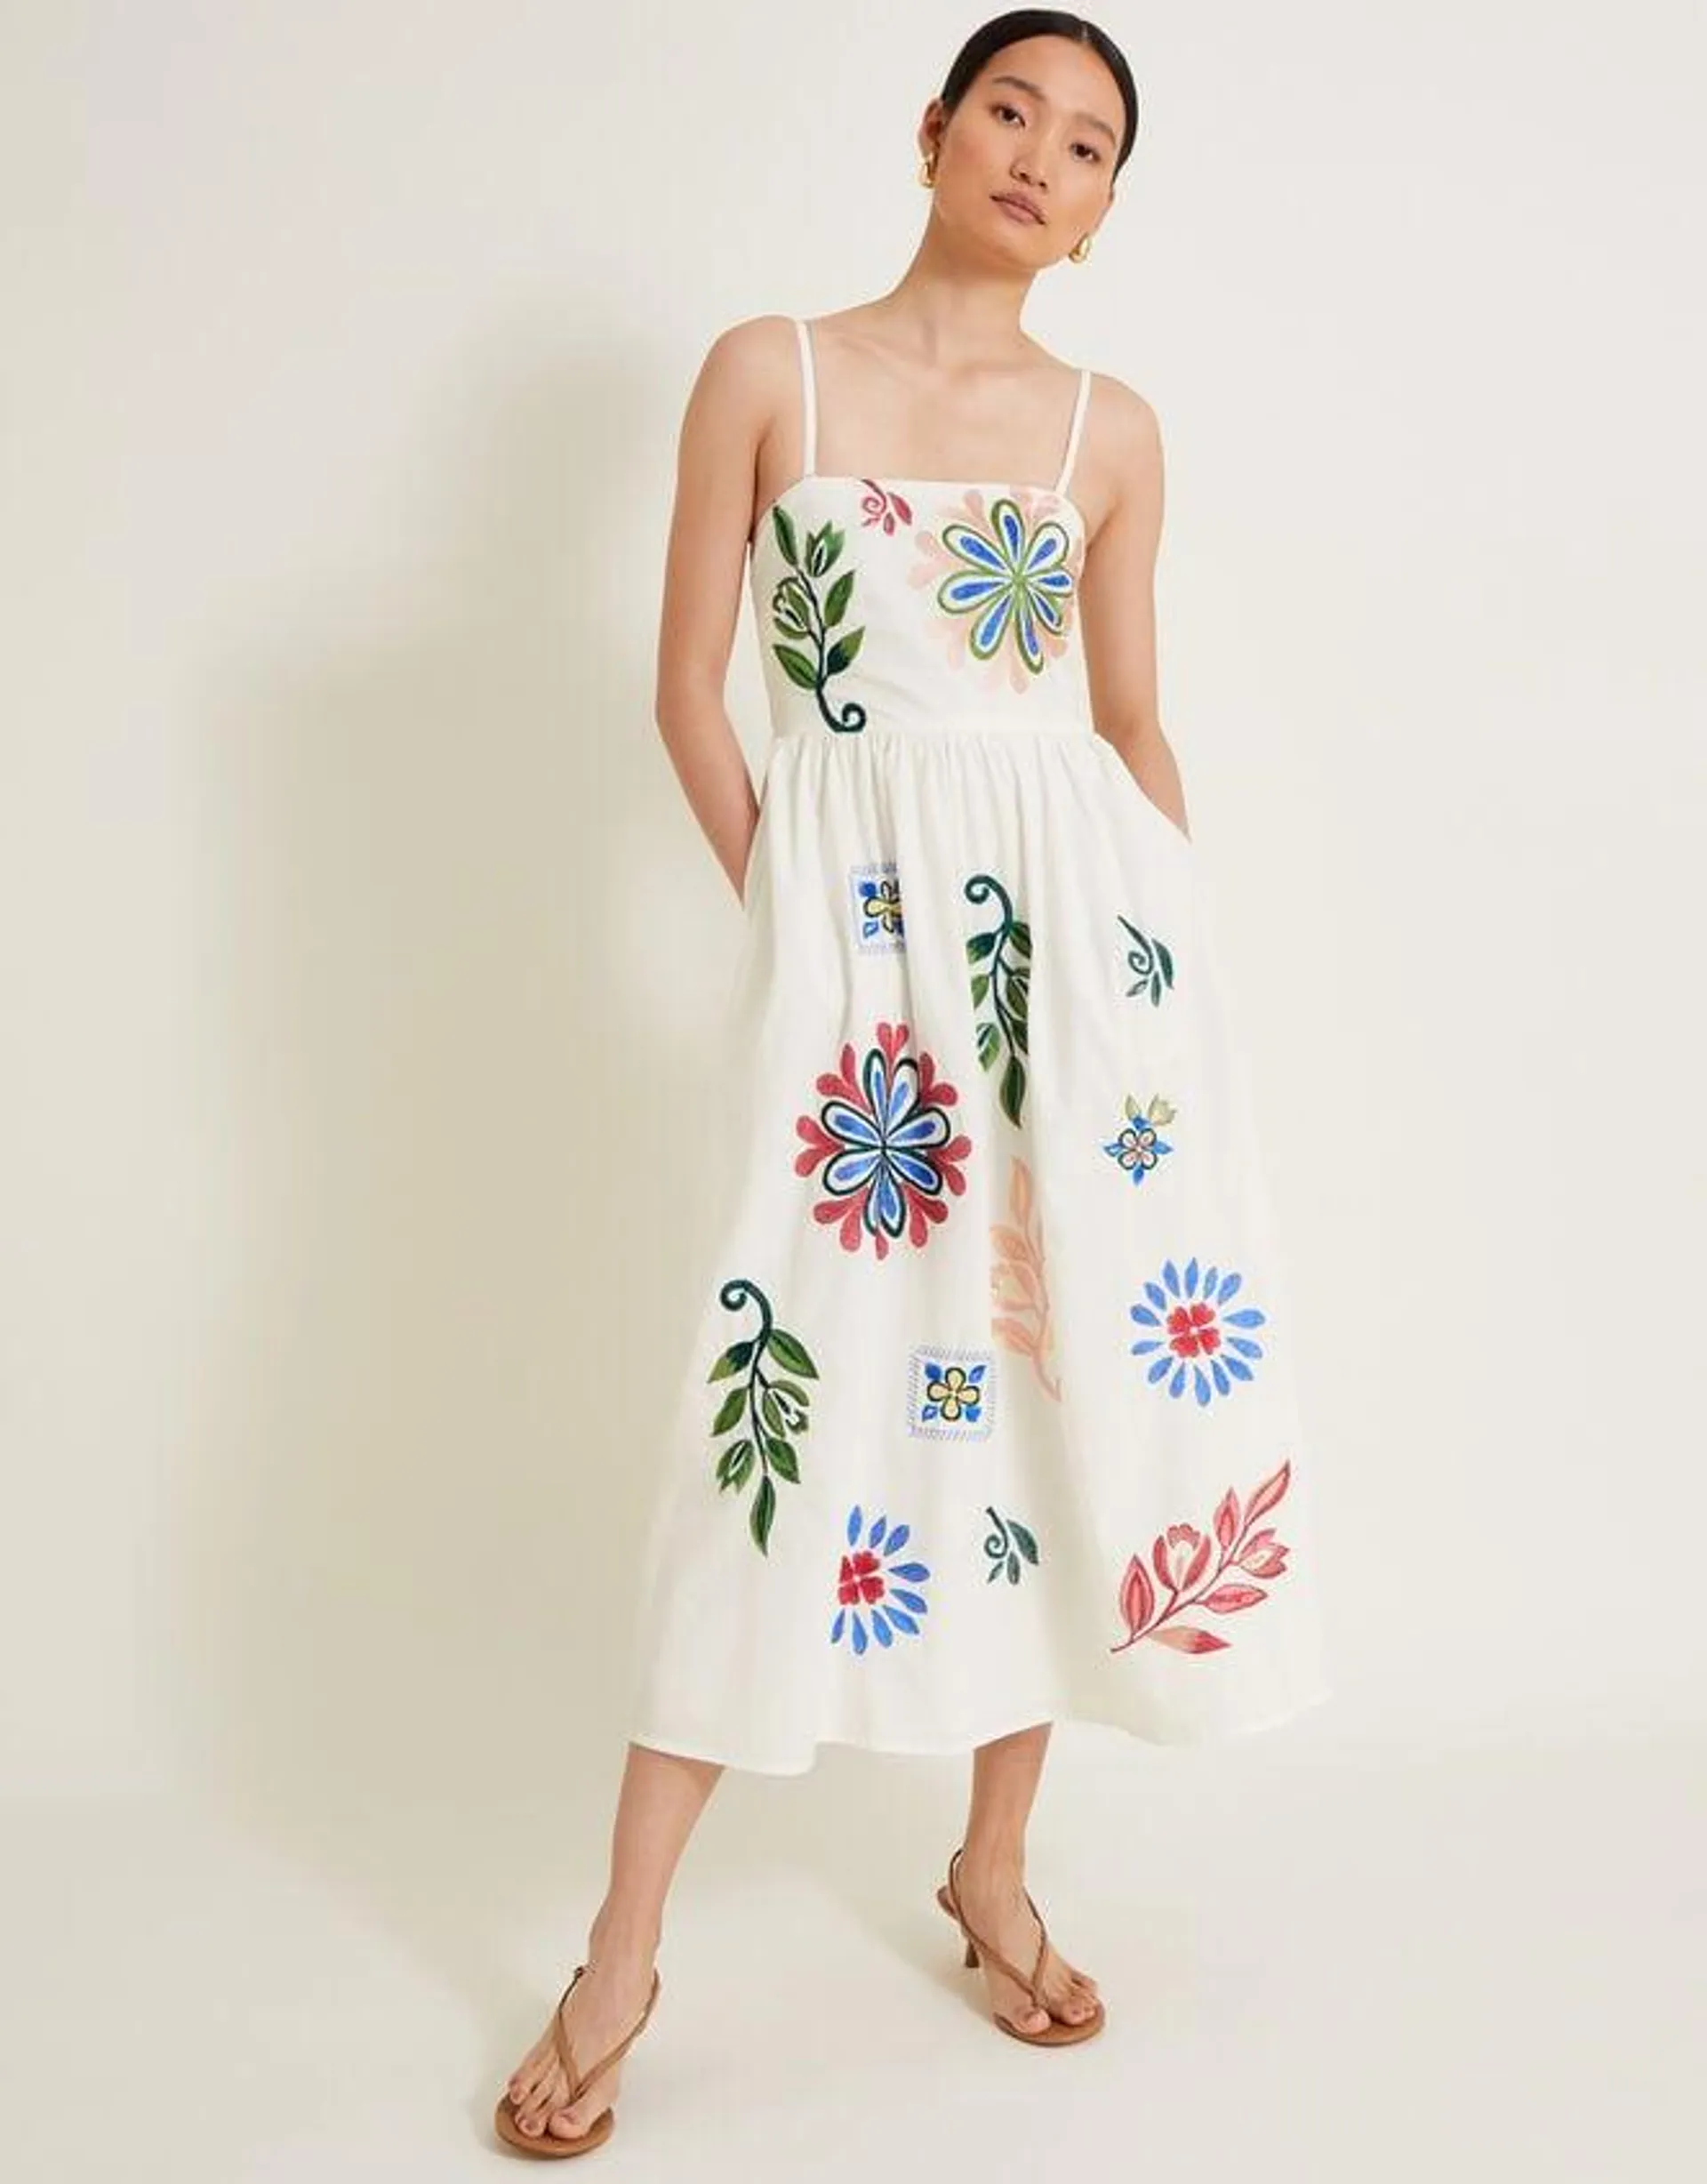 Polly Embroidered Dress White